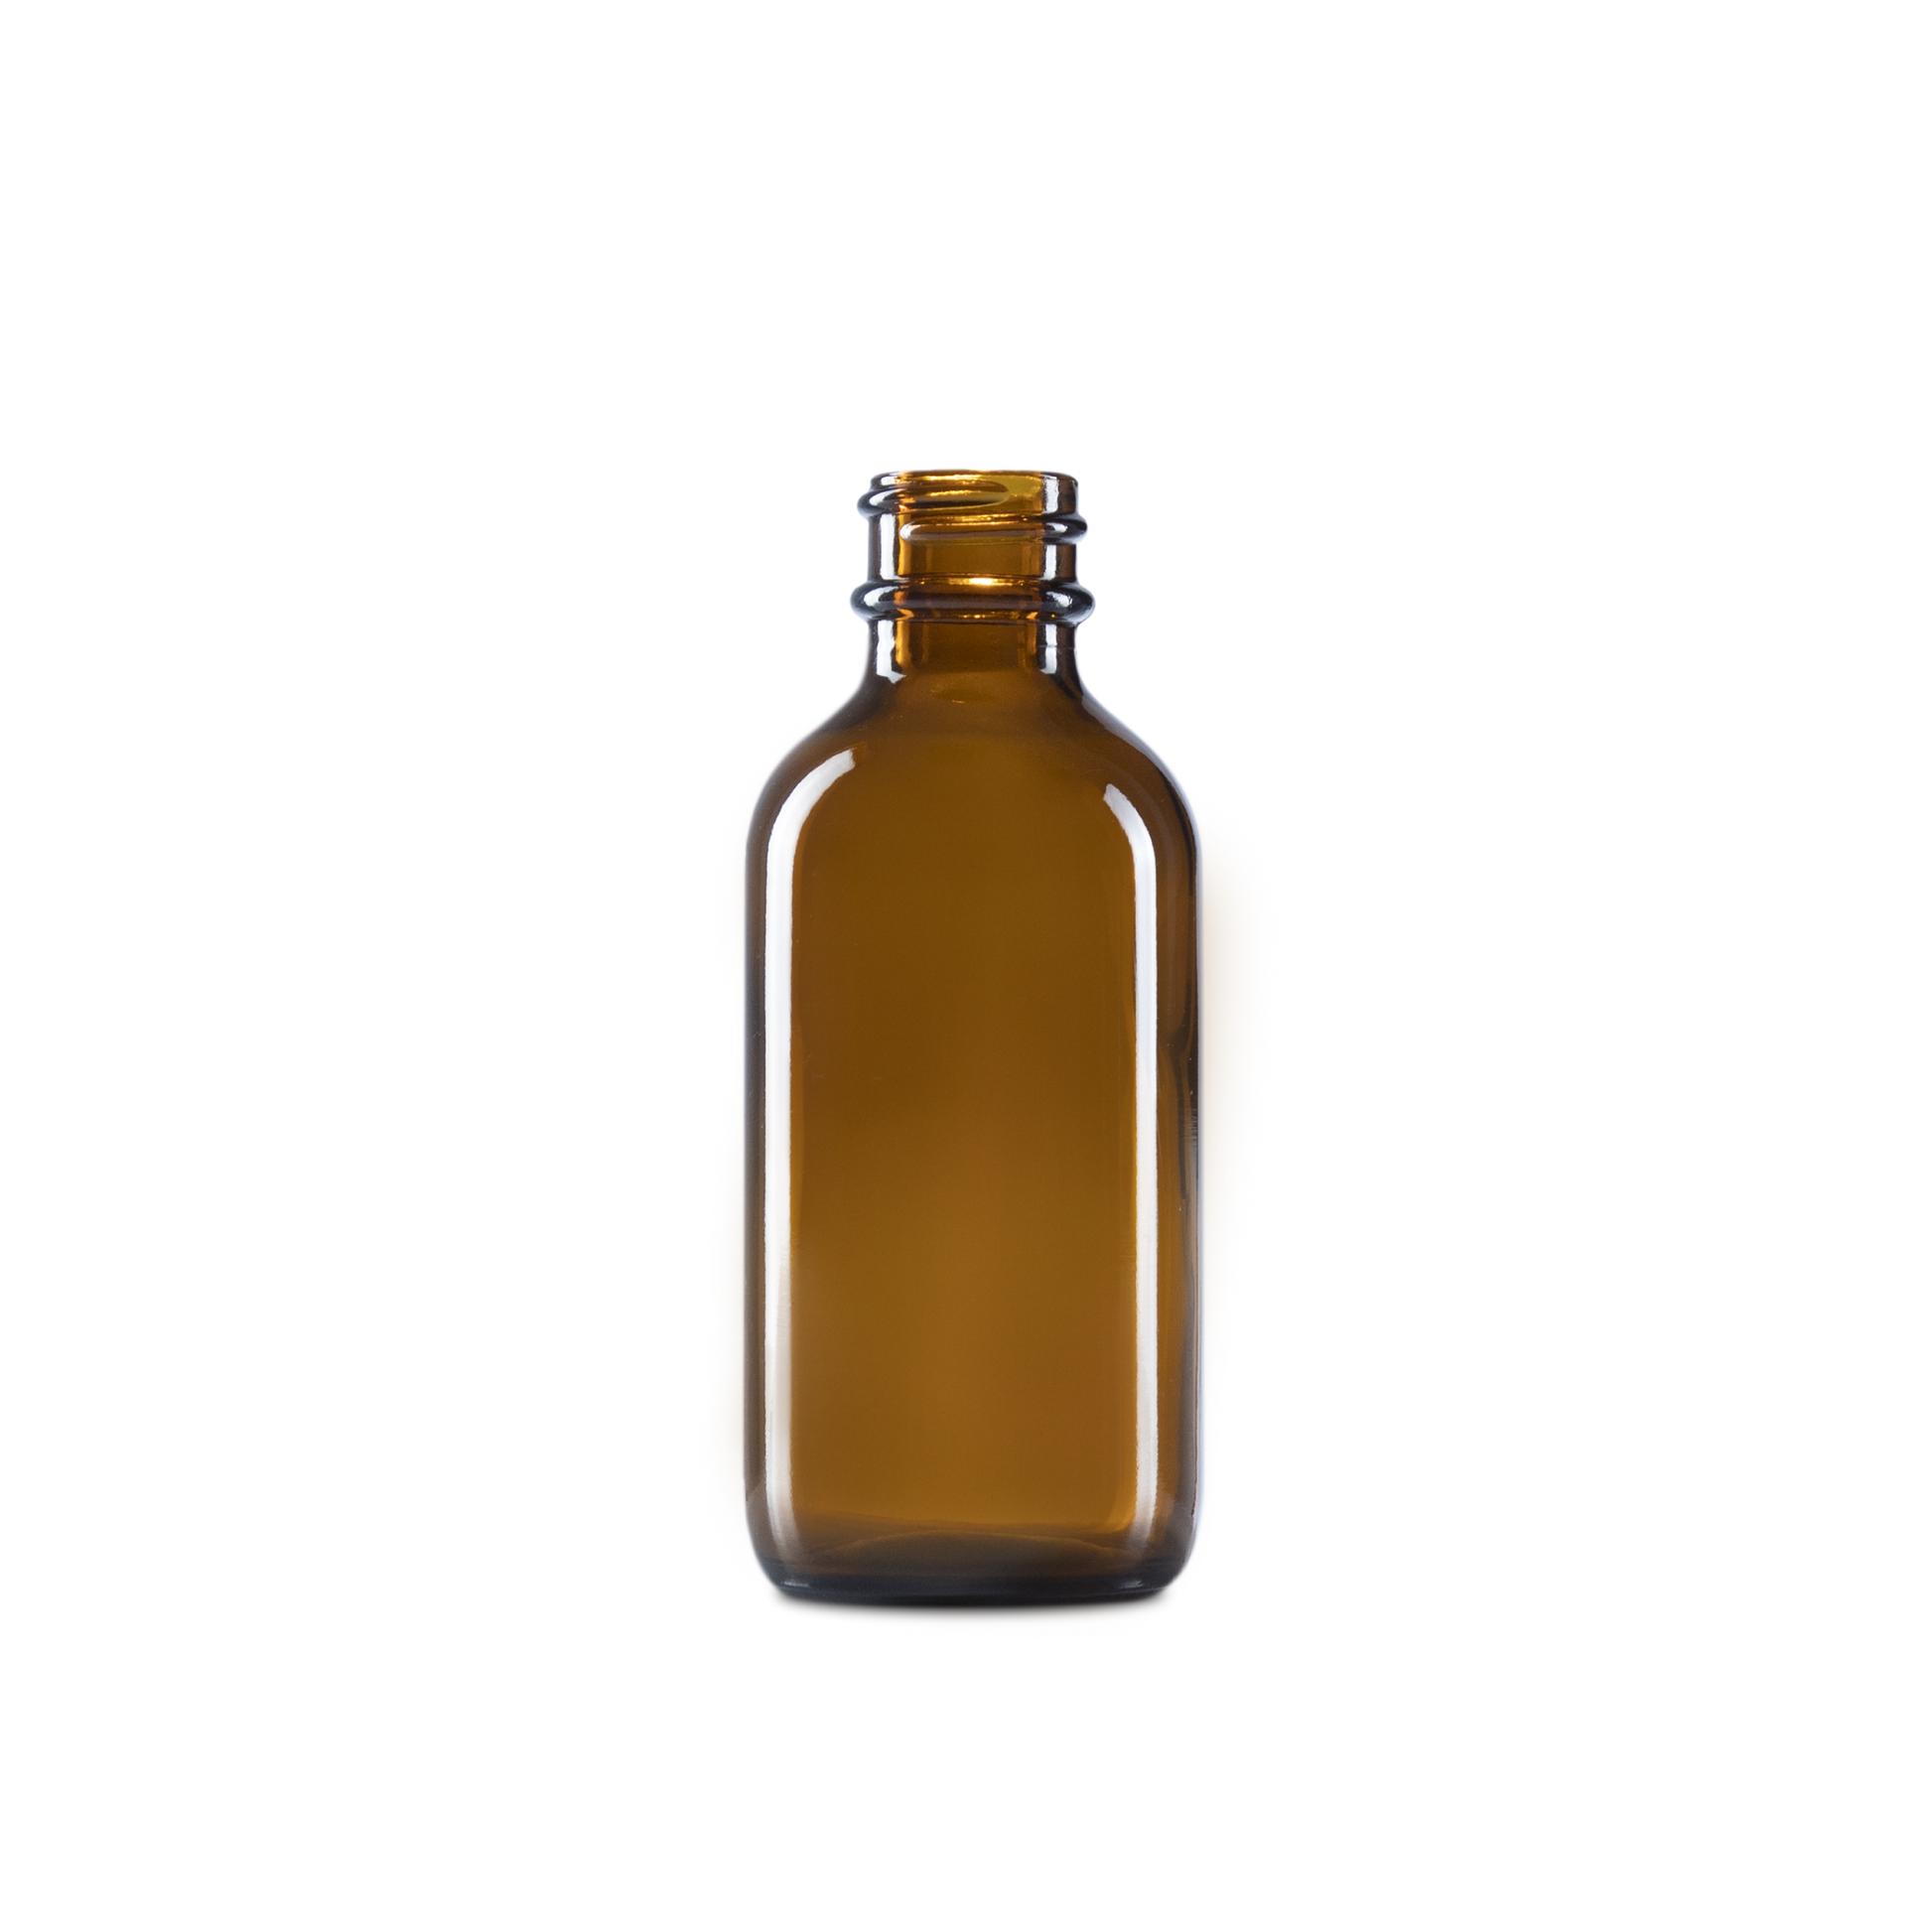 2 oz amber boston round glass Bottle provides an elegant and sophisticated vessel for many different types of liquids.